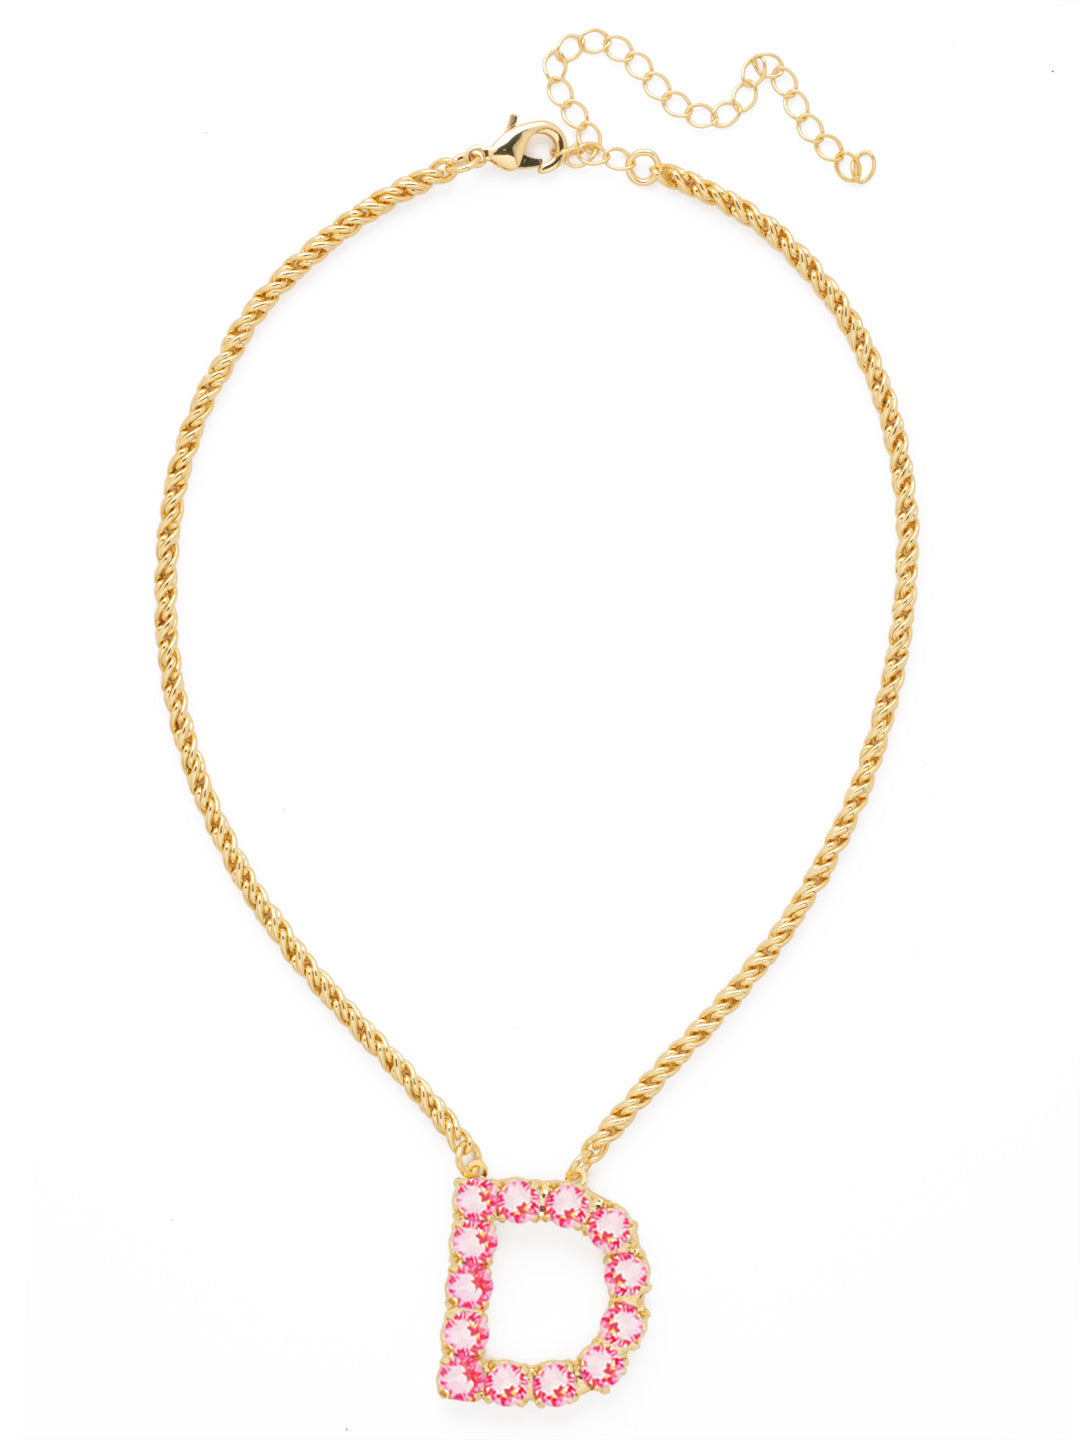 D Initial Rope Pendant Necklace - NFK23BGETP - <p>The Initial Rope Pendant Necklace features a crystal encrusted metal monogram pendant on an adjustable rope chain, secured with a lobster claw clasp. From Sorrelli's Electric Pink collection in our Bright Gold-tone finish.</p>